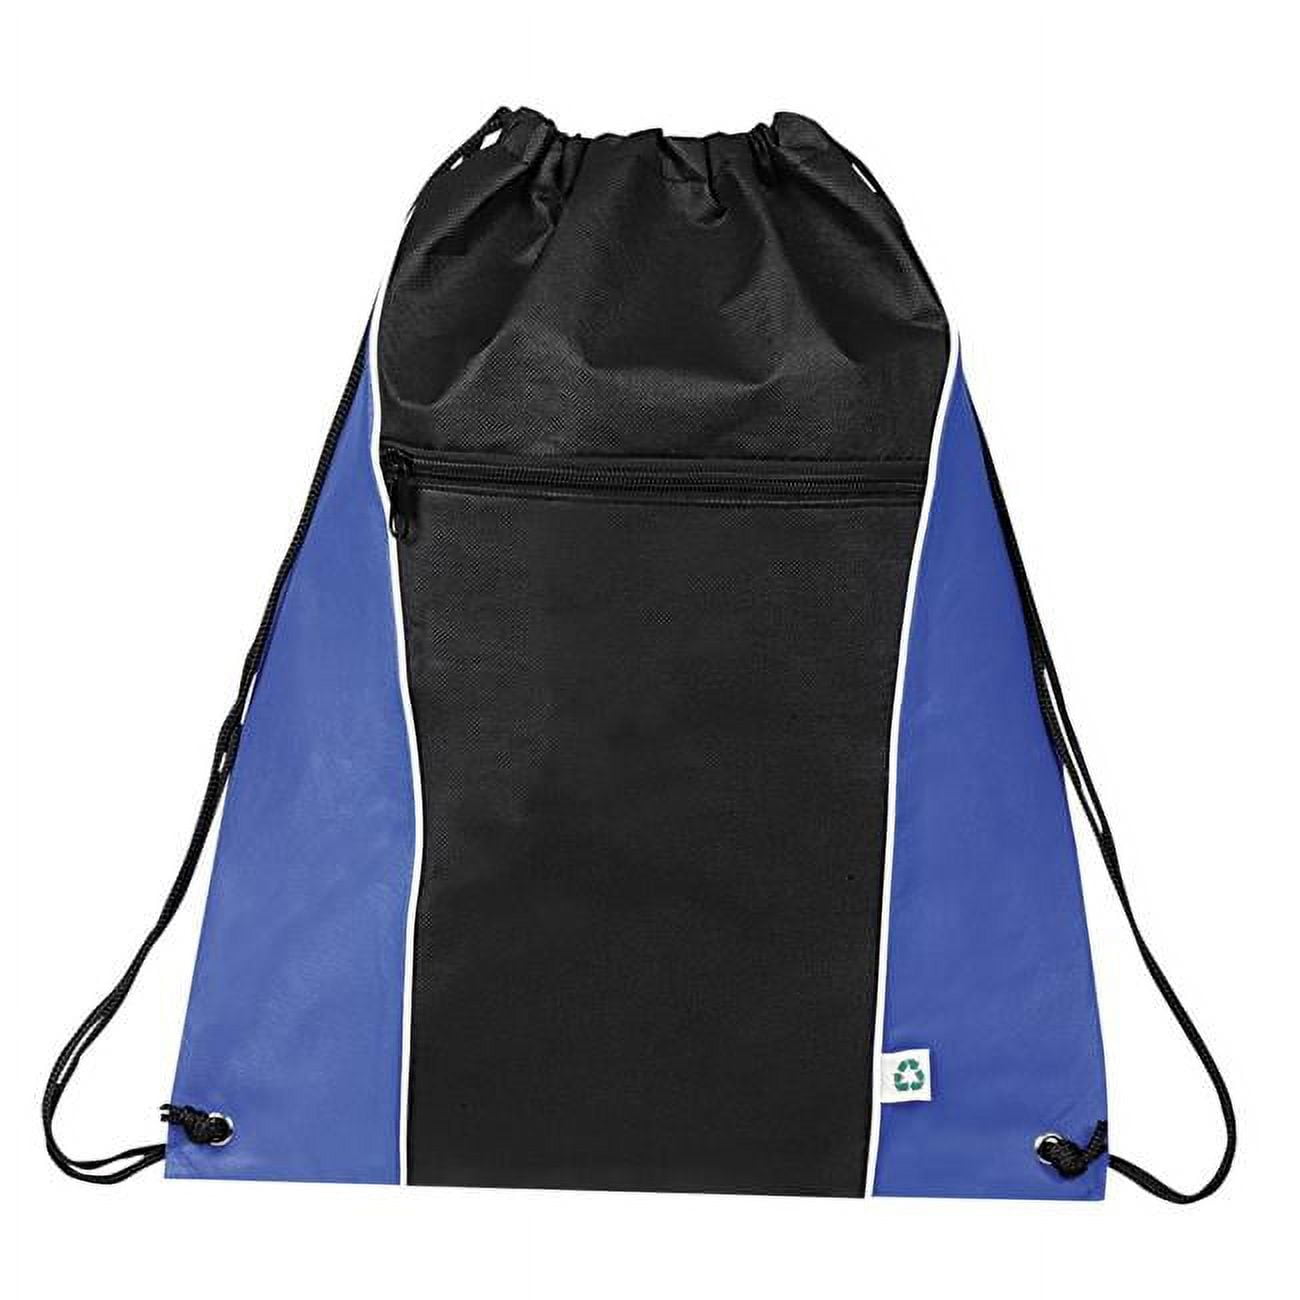 2319127 18 X 15 In. Eco Friendly Drawstring Bag, Assorted Color - Case Of 100